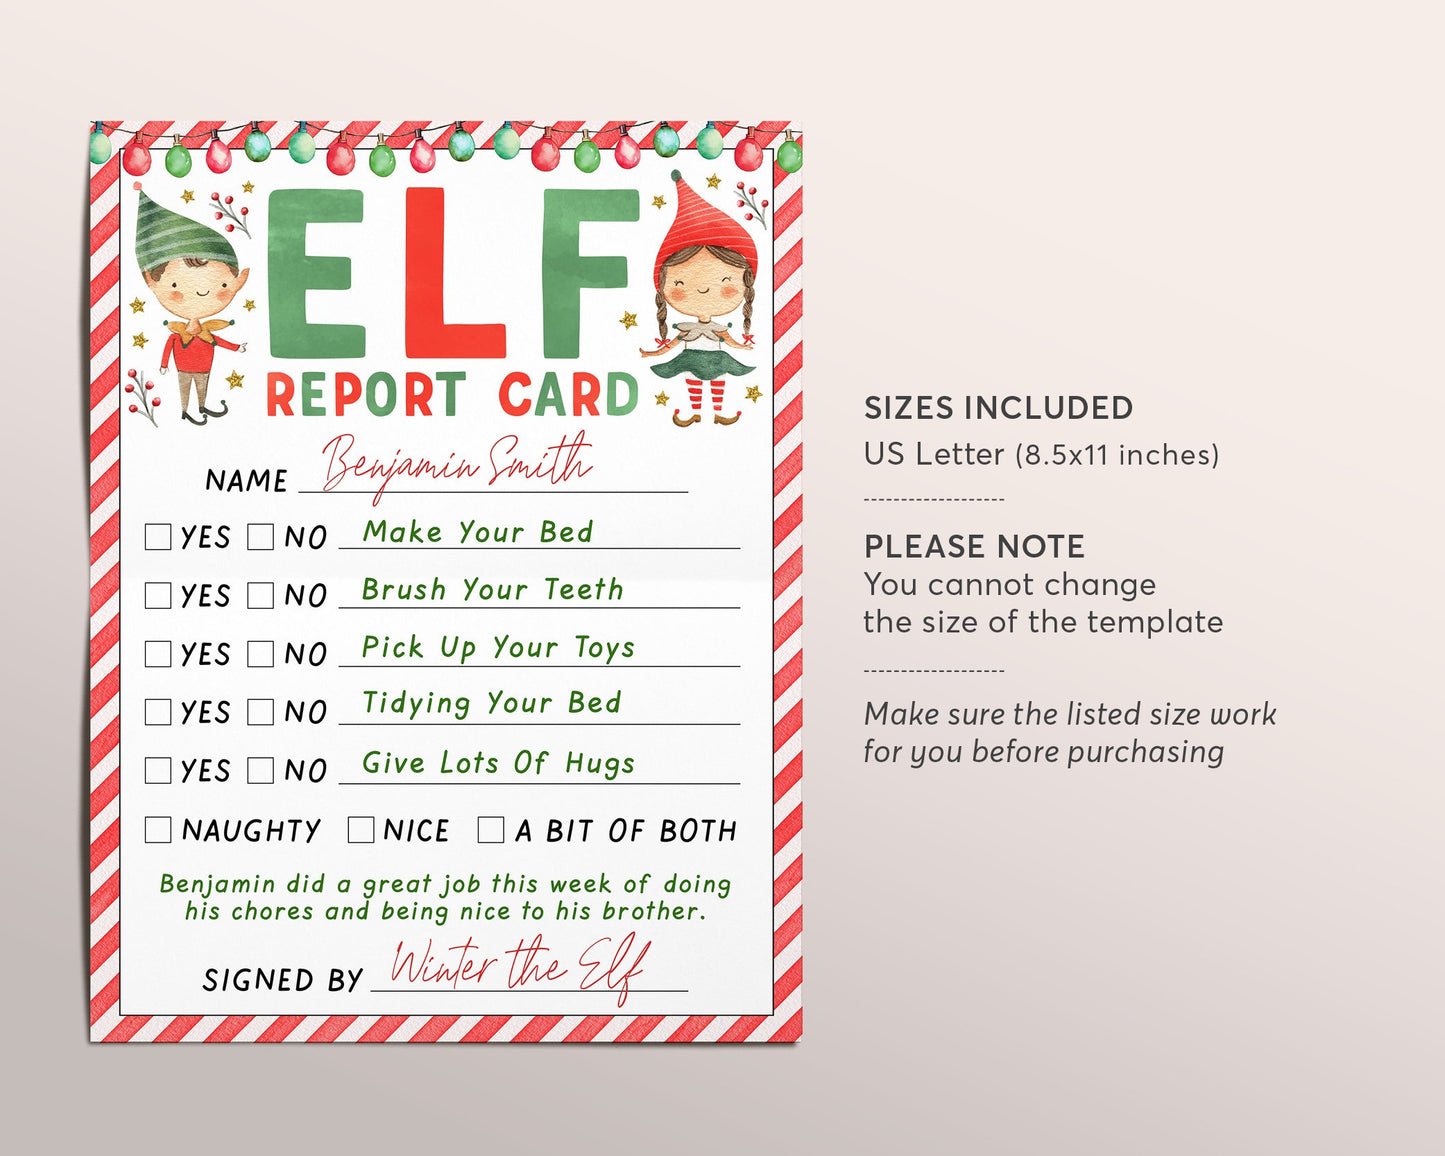 Elf Report Card Editable Template, Christmas Elf Report Letter Naughty Or Nice, Santa Claus Report Card, North Pole Official Santa Mail